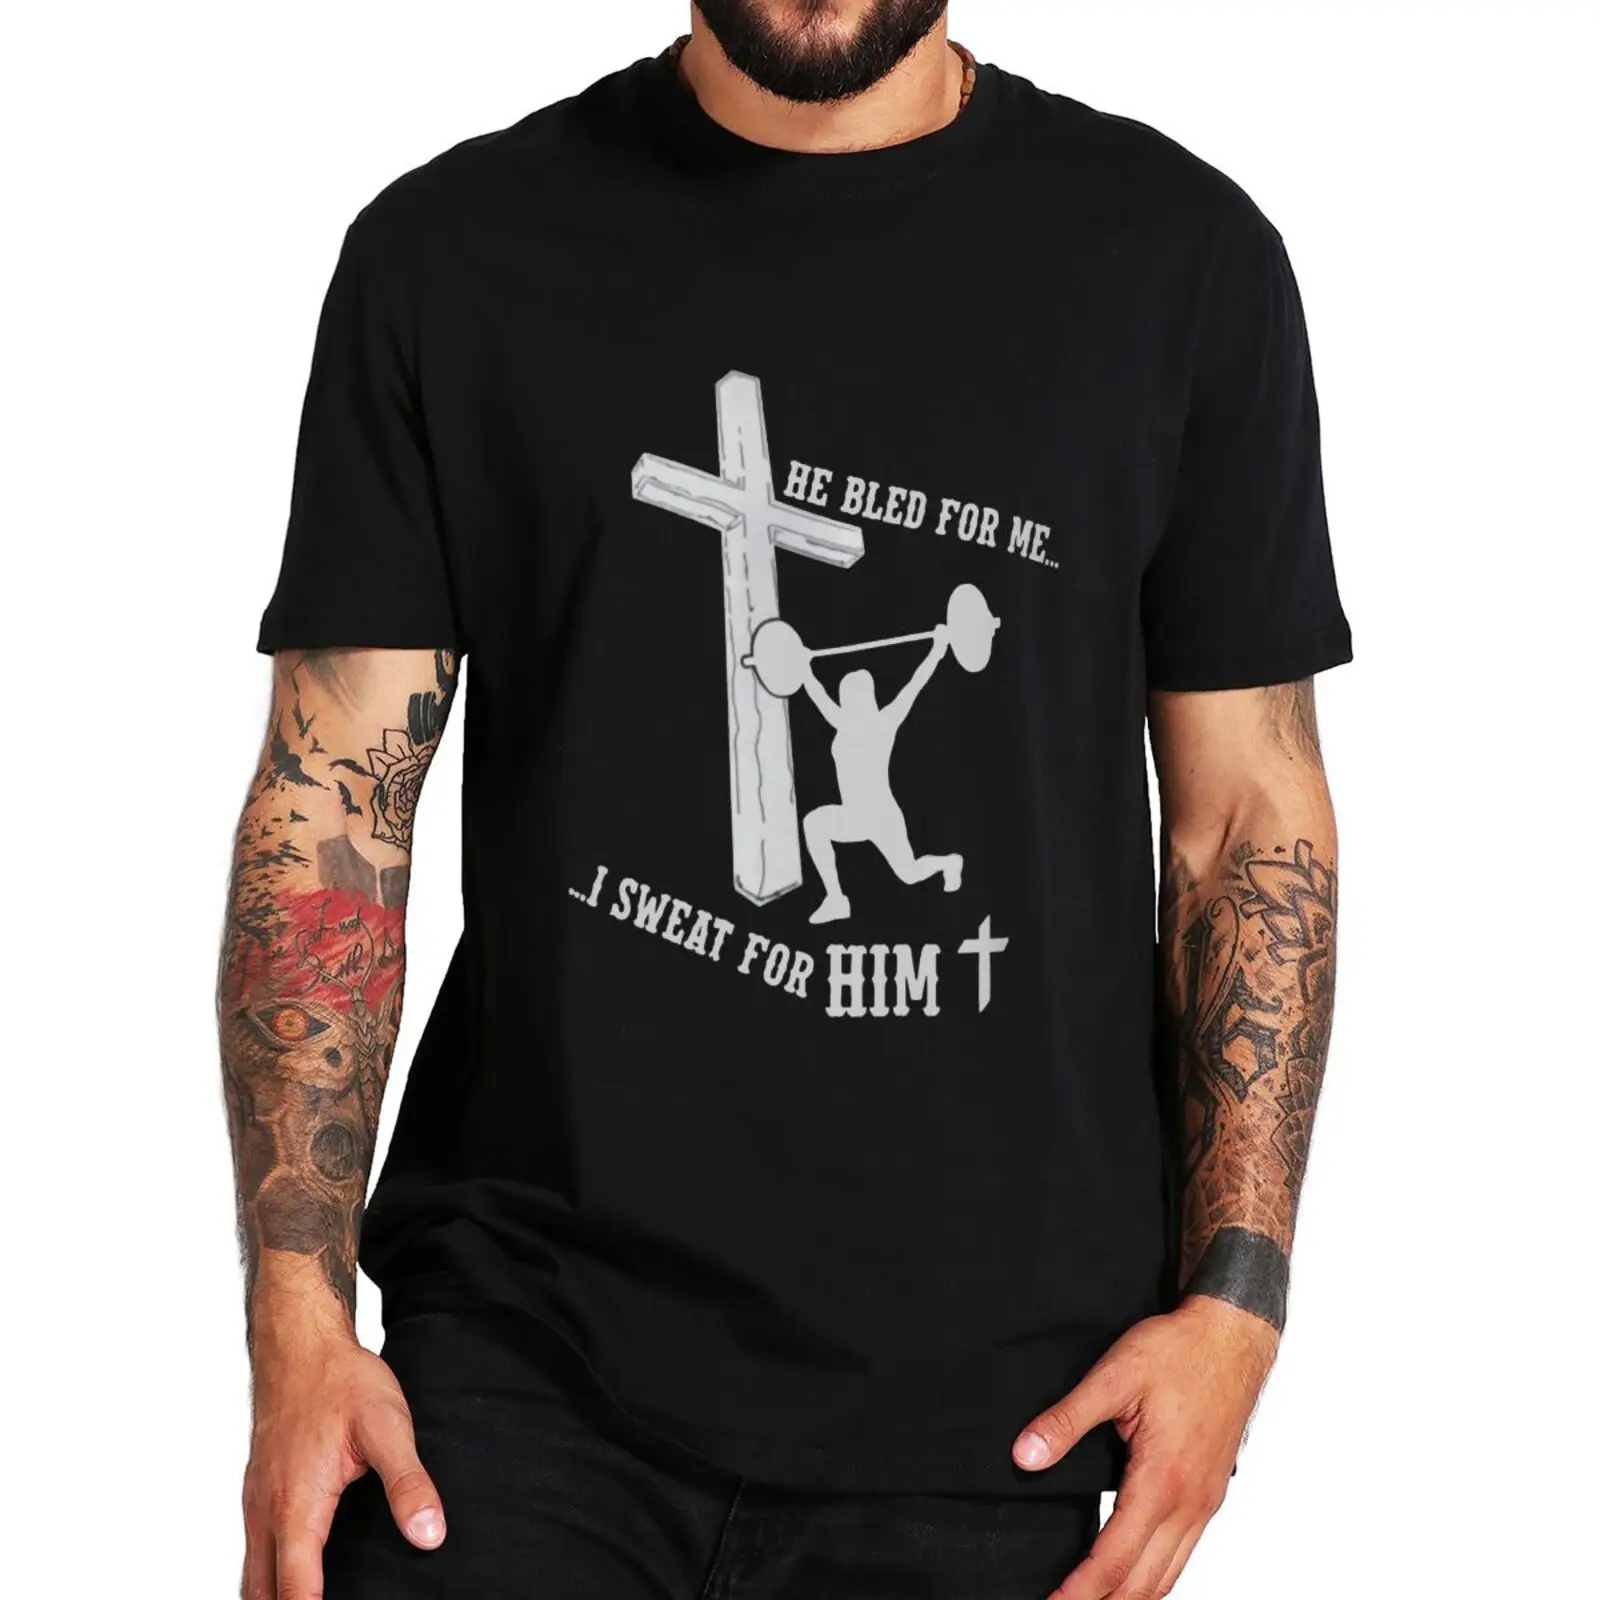 

He Bled For Me I Sweat For Him T Shirt Humor Christianity Jokes Gift Men Women T-shirts EU Size 100% Cotton Unisex Casual Tops